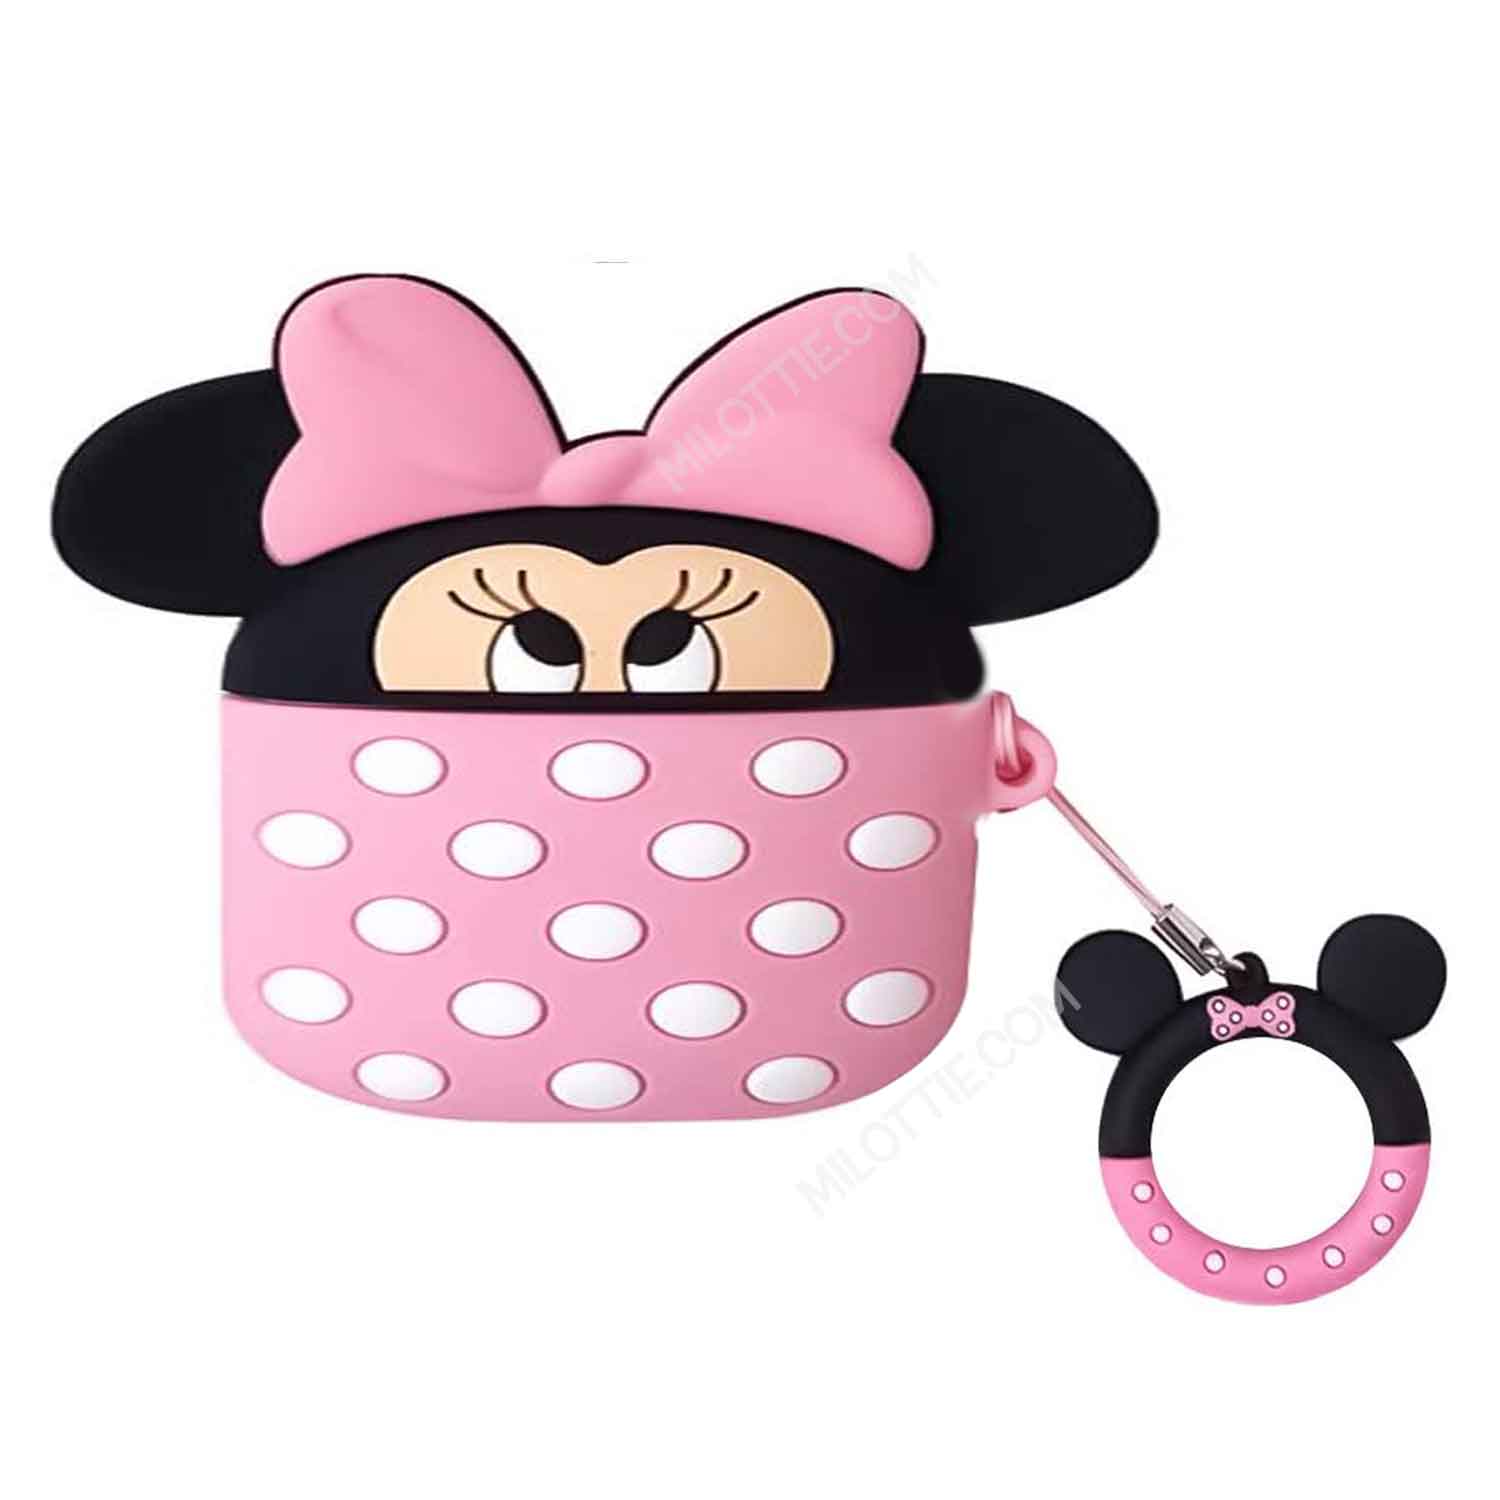 Minnie Mouse Apple Airpods Case-2